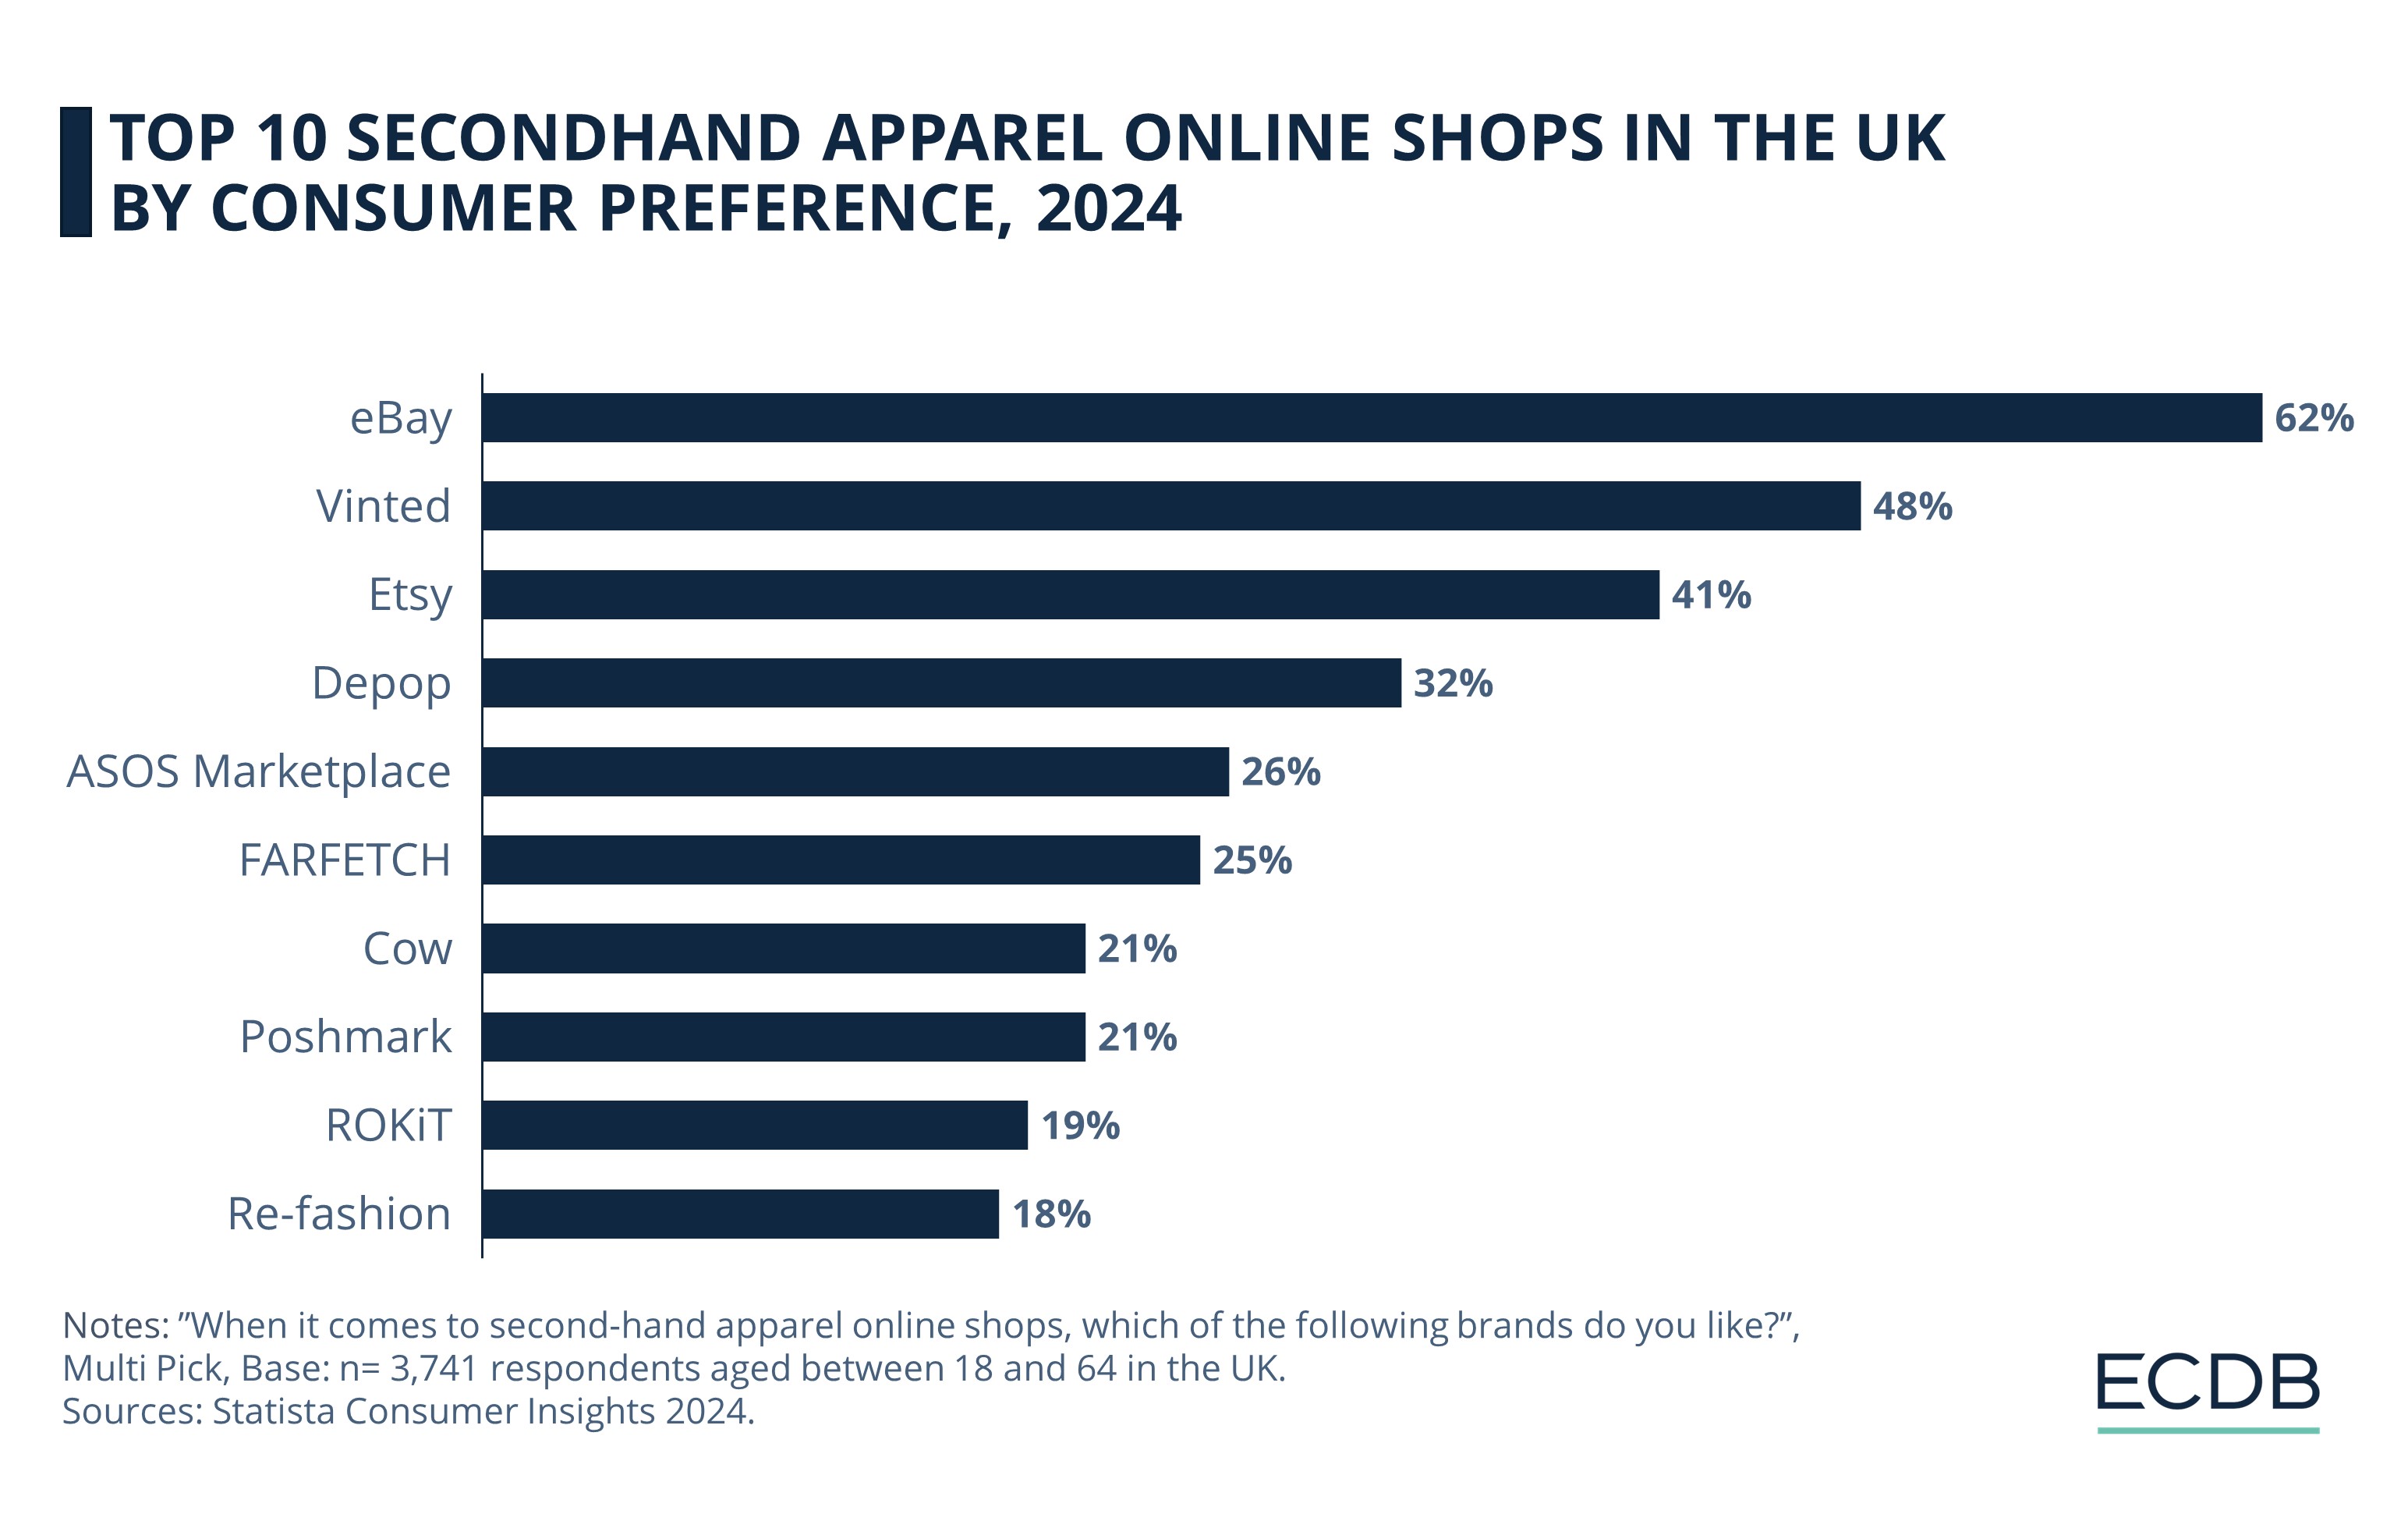 Top 10 Secondhand Apparel Online Shops in the UK by Consumer Preference, 2024